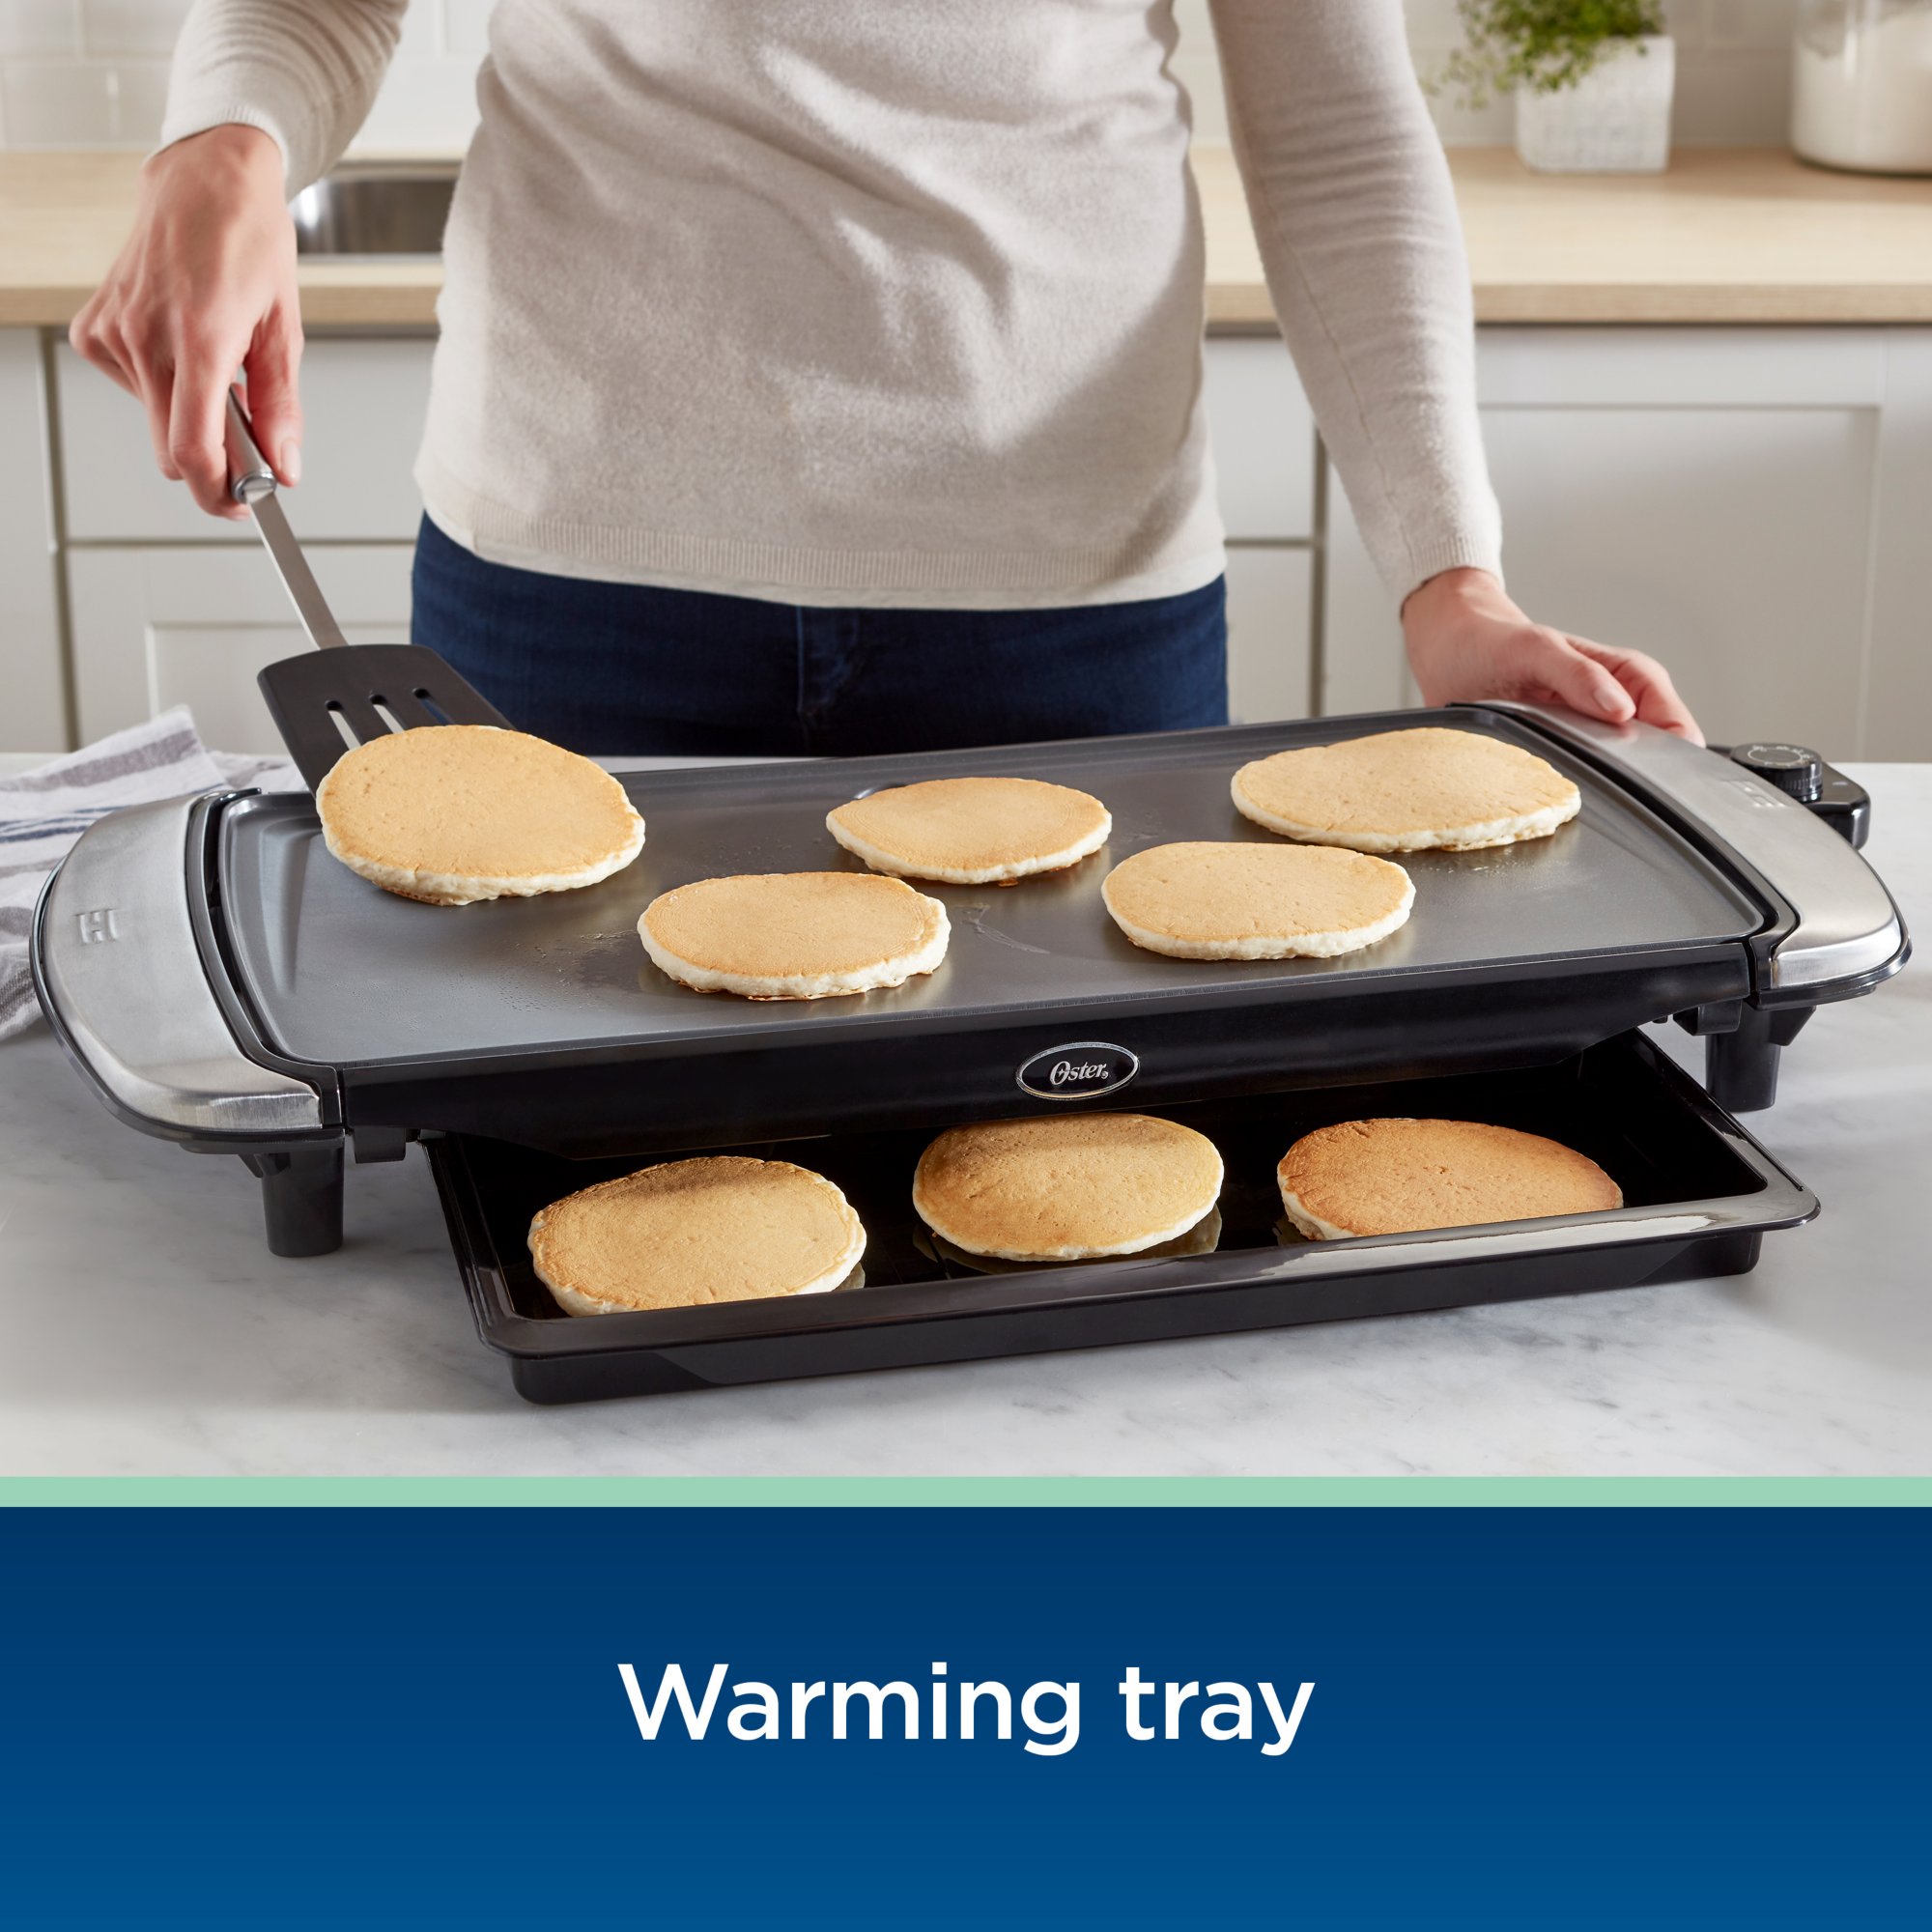 https://s7d9.scene7.com/is/image/NewellRubbermaid/2109985_Oster_Griddle_ATF_05?wid=2000&hei=2000